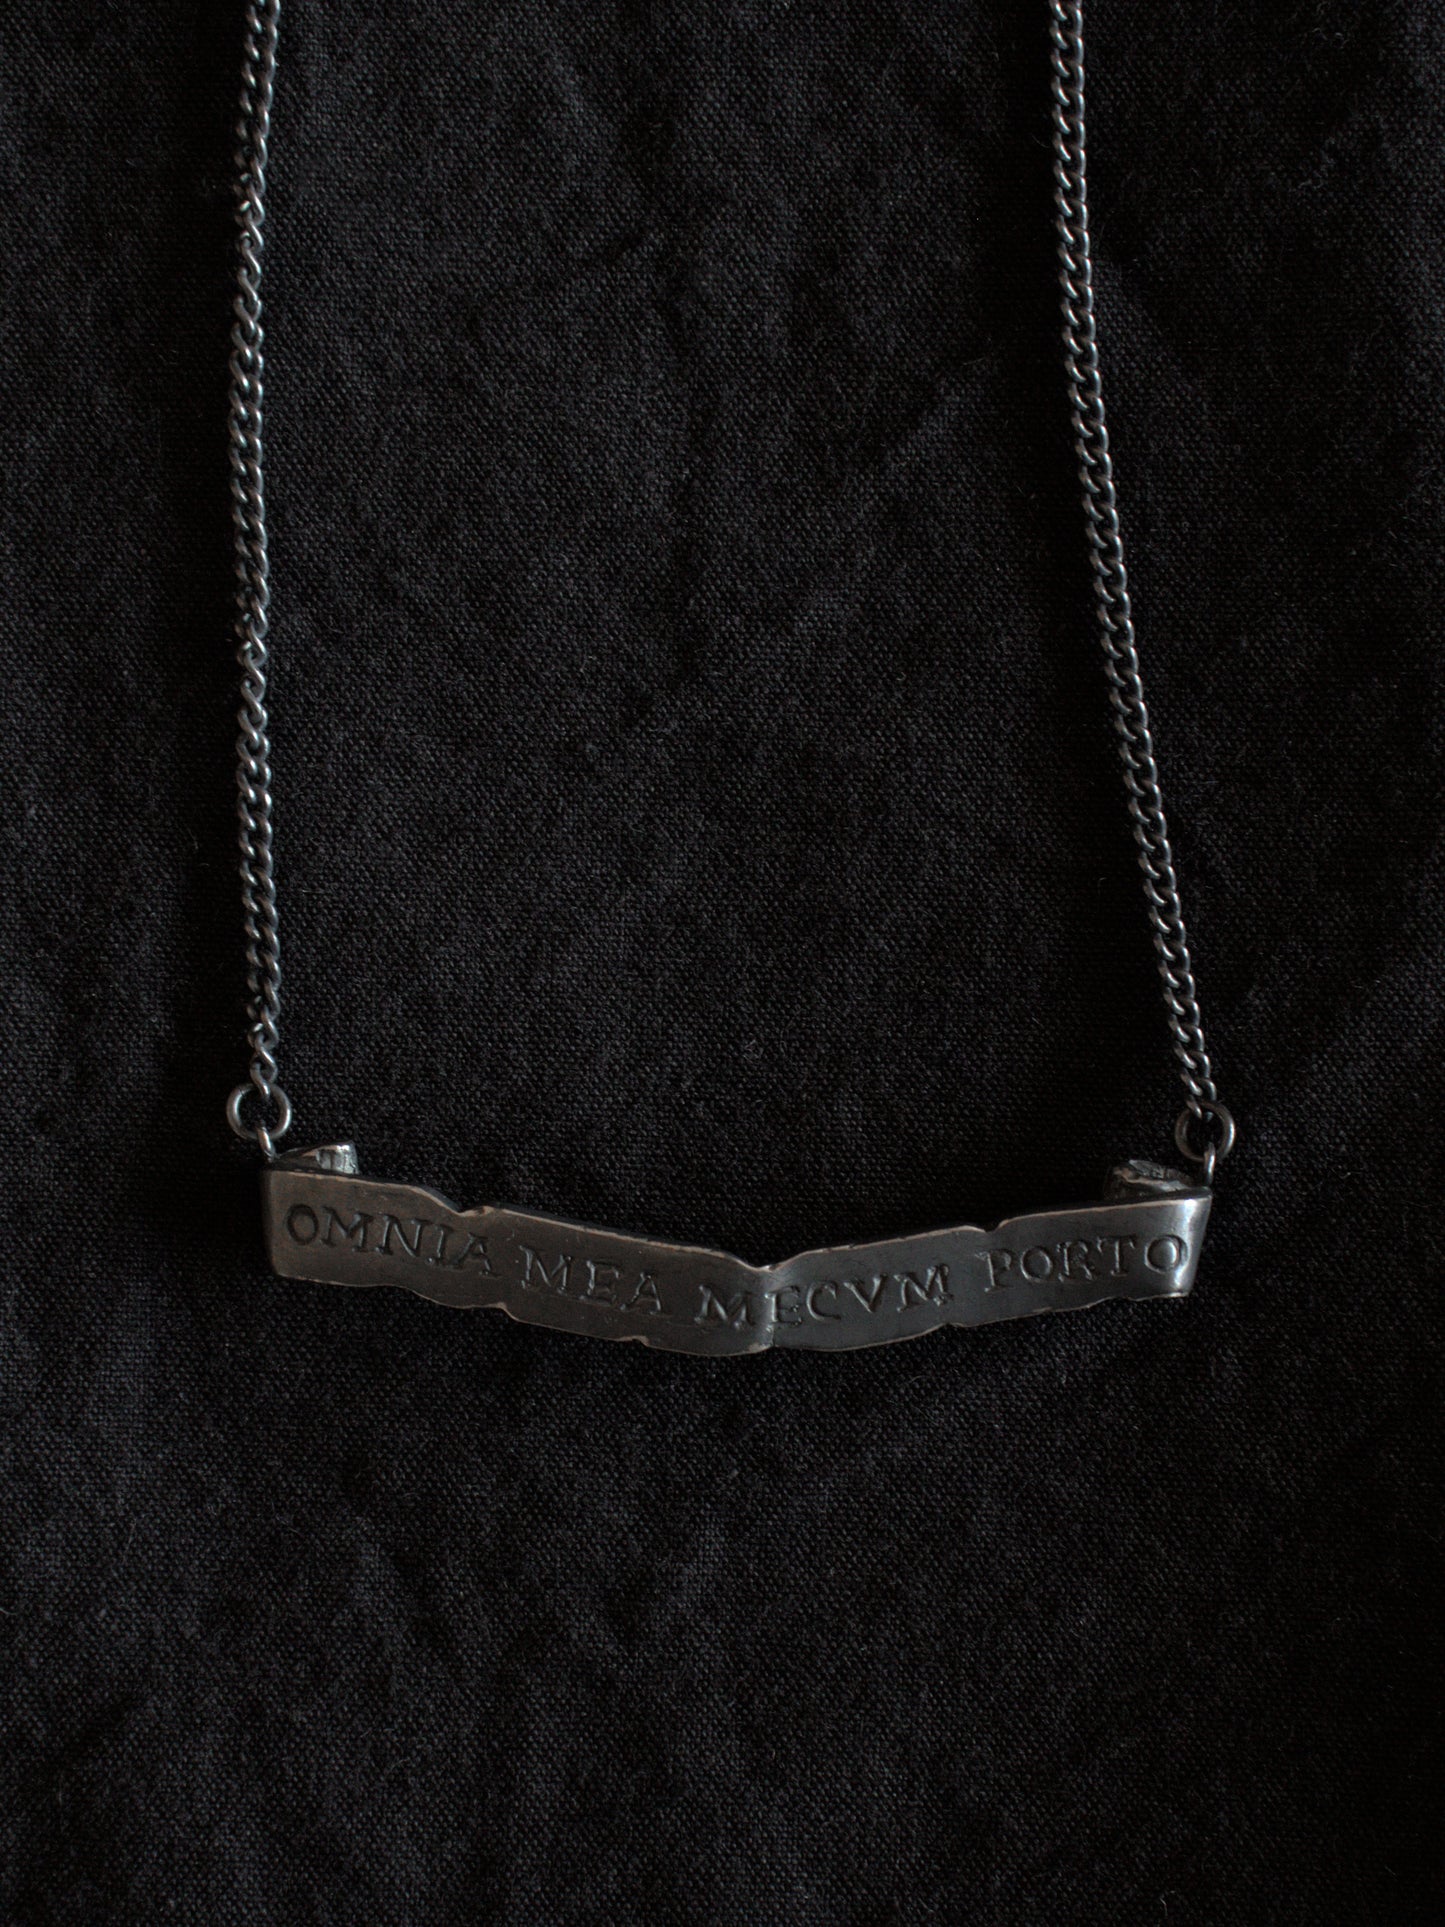 Hereafter necklace